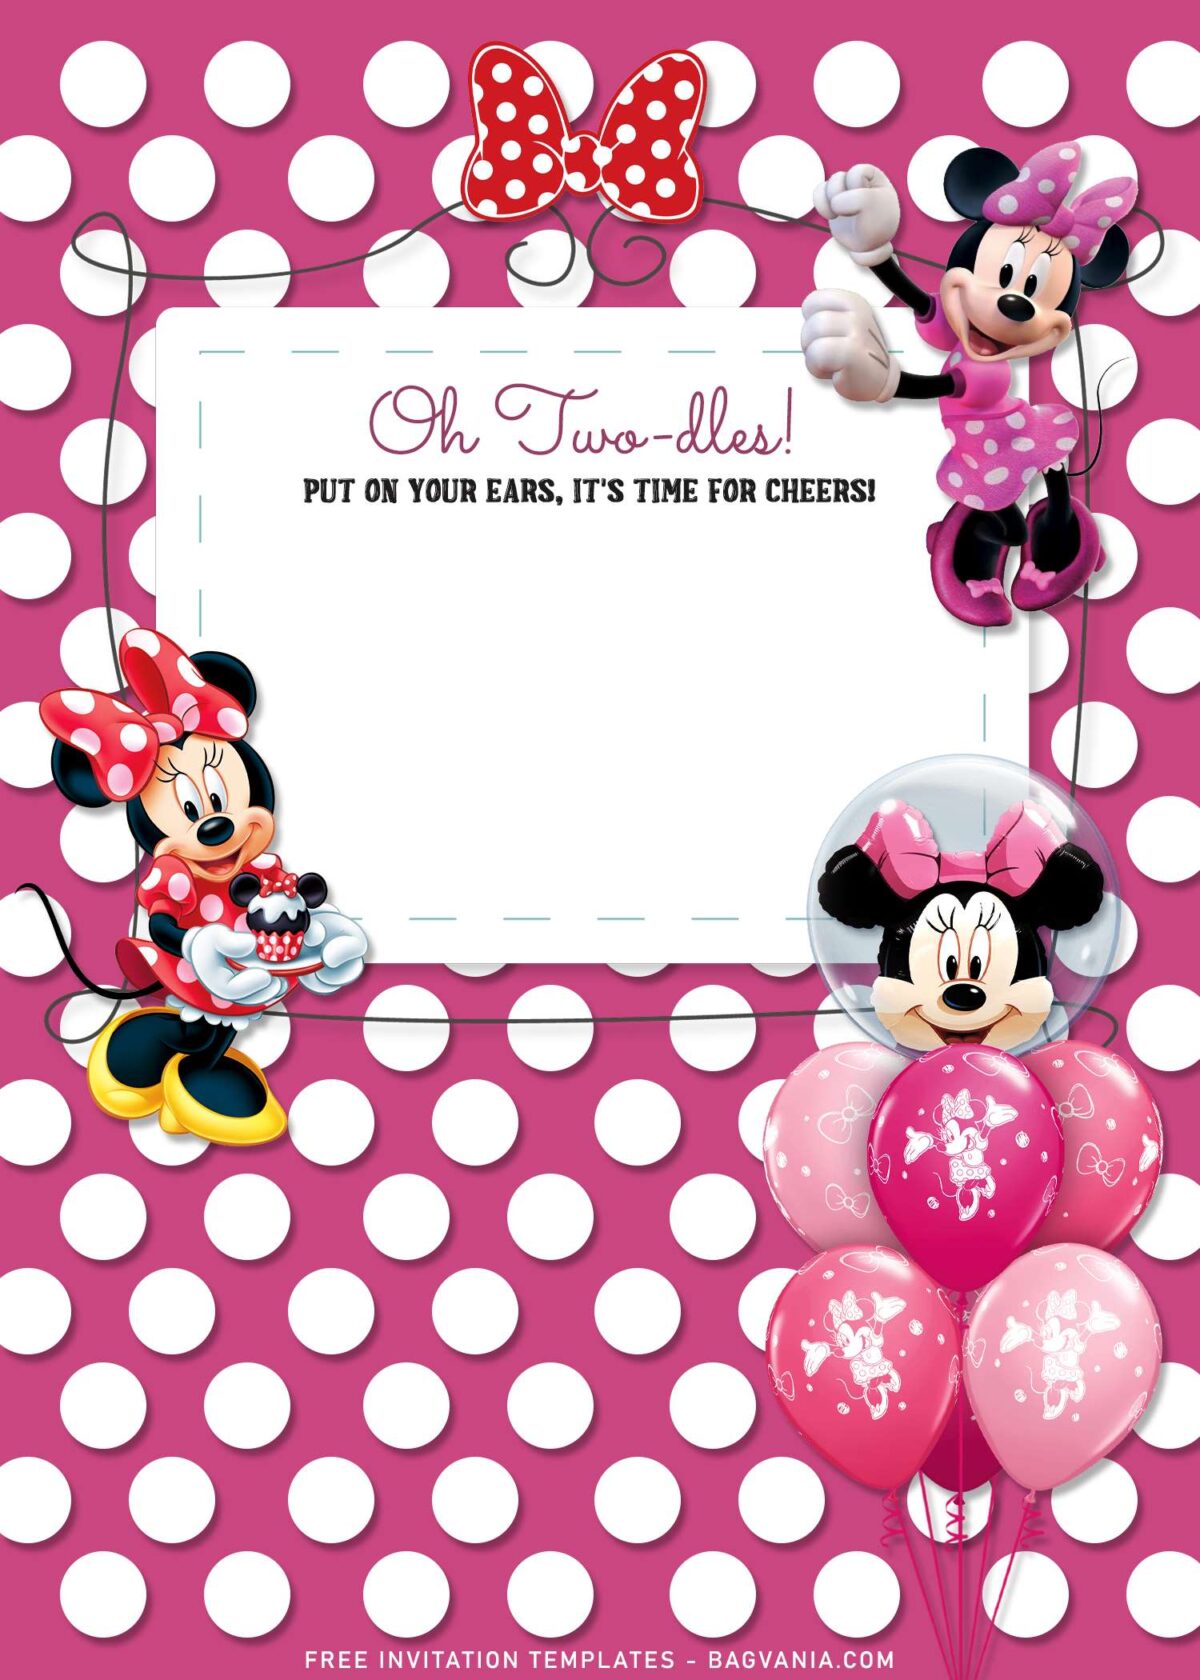 7+ Minnie Mouse Birthday Invitation Templates For Girls Birthday Of All Ages with Minnie Mouse balloons